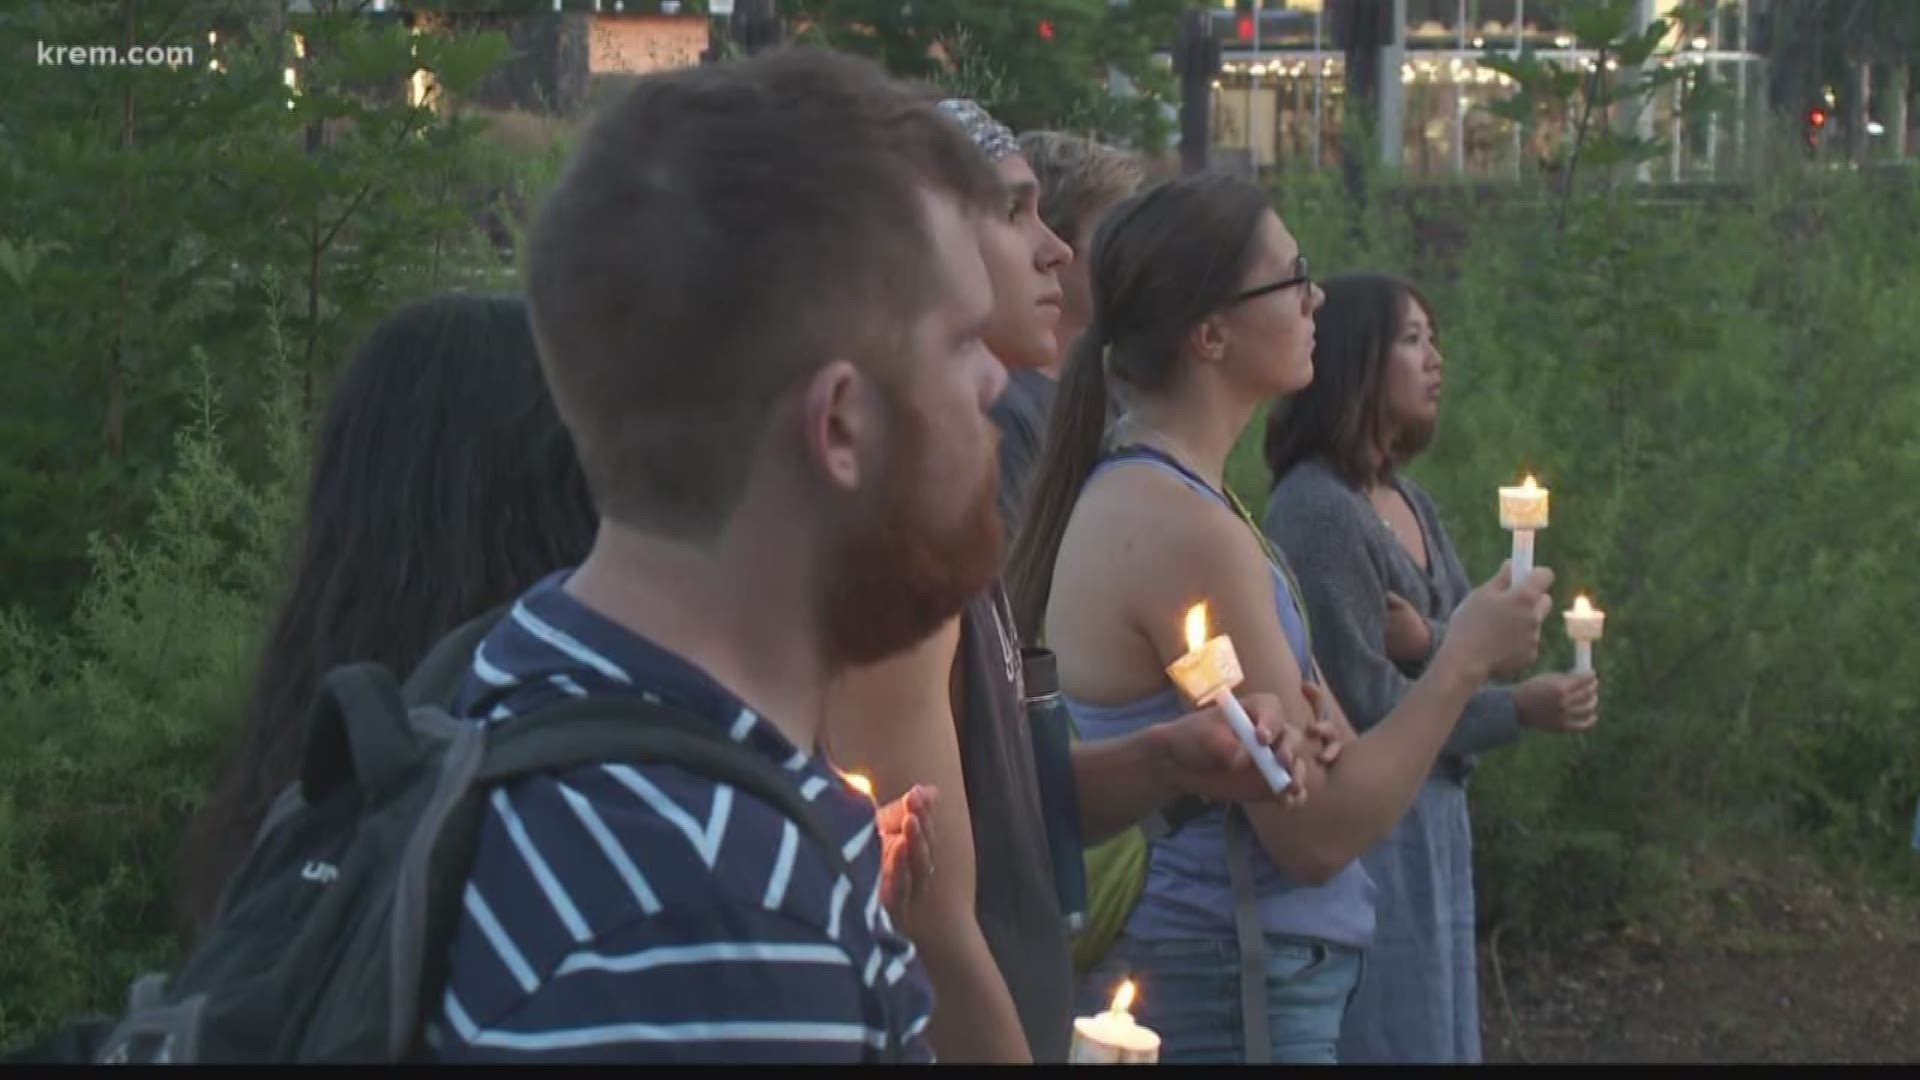 The protest started around 8 p.m. Friday at the Riverfront Clocktower. Protesters say they want an end to what they call -- "cruel conditions" at detention camps.